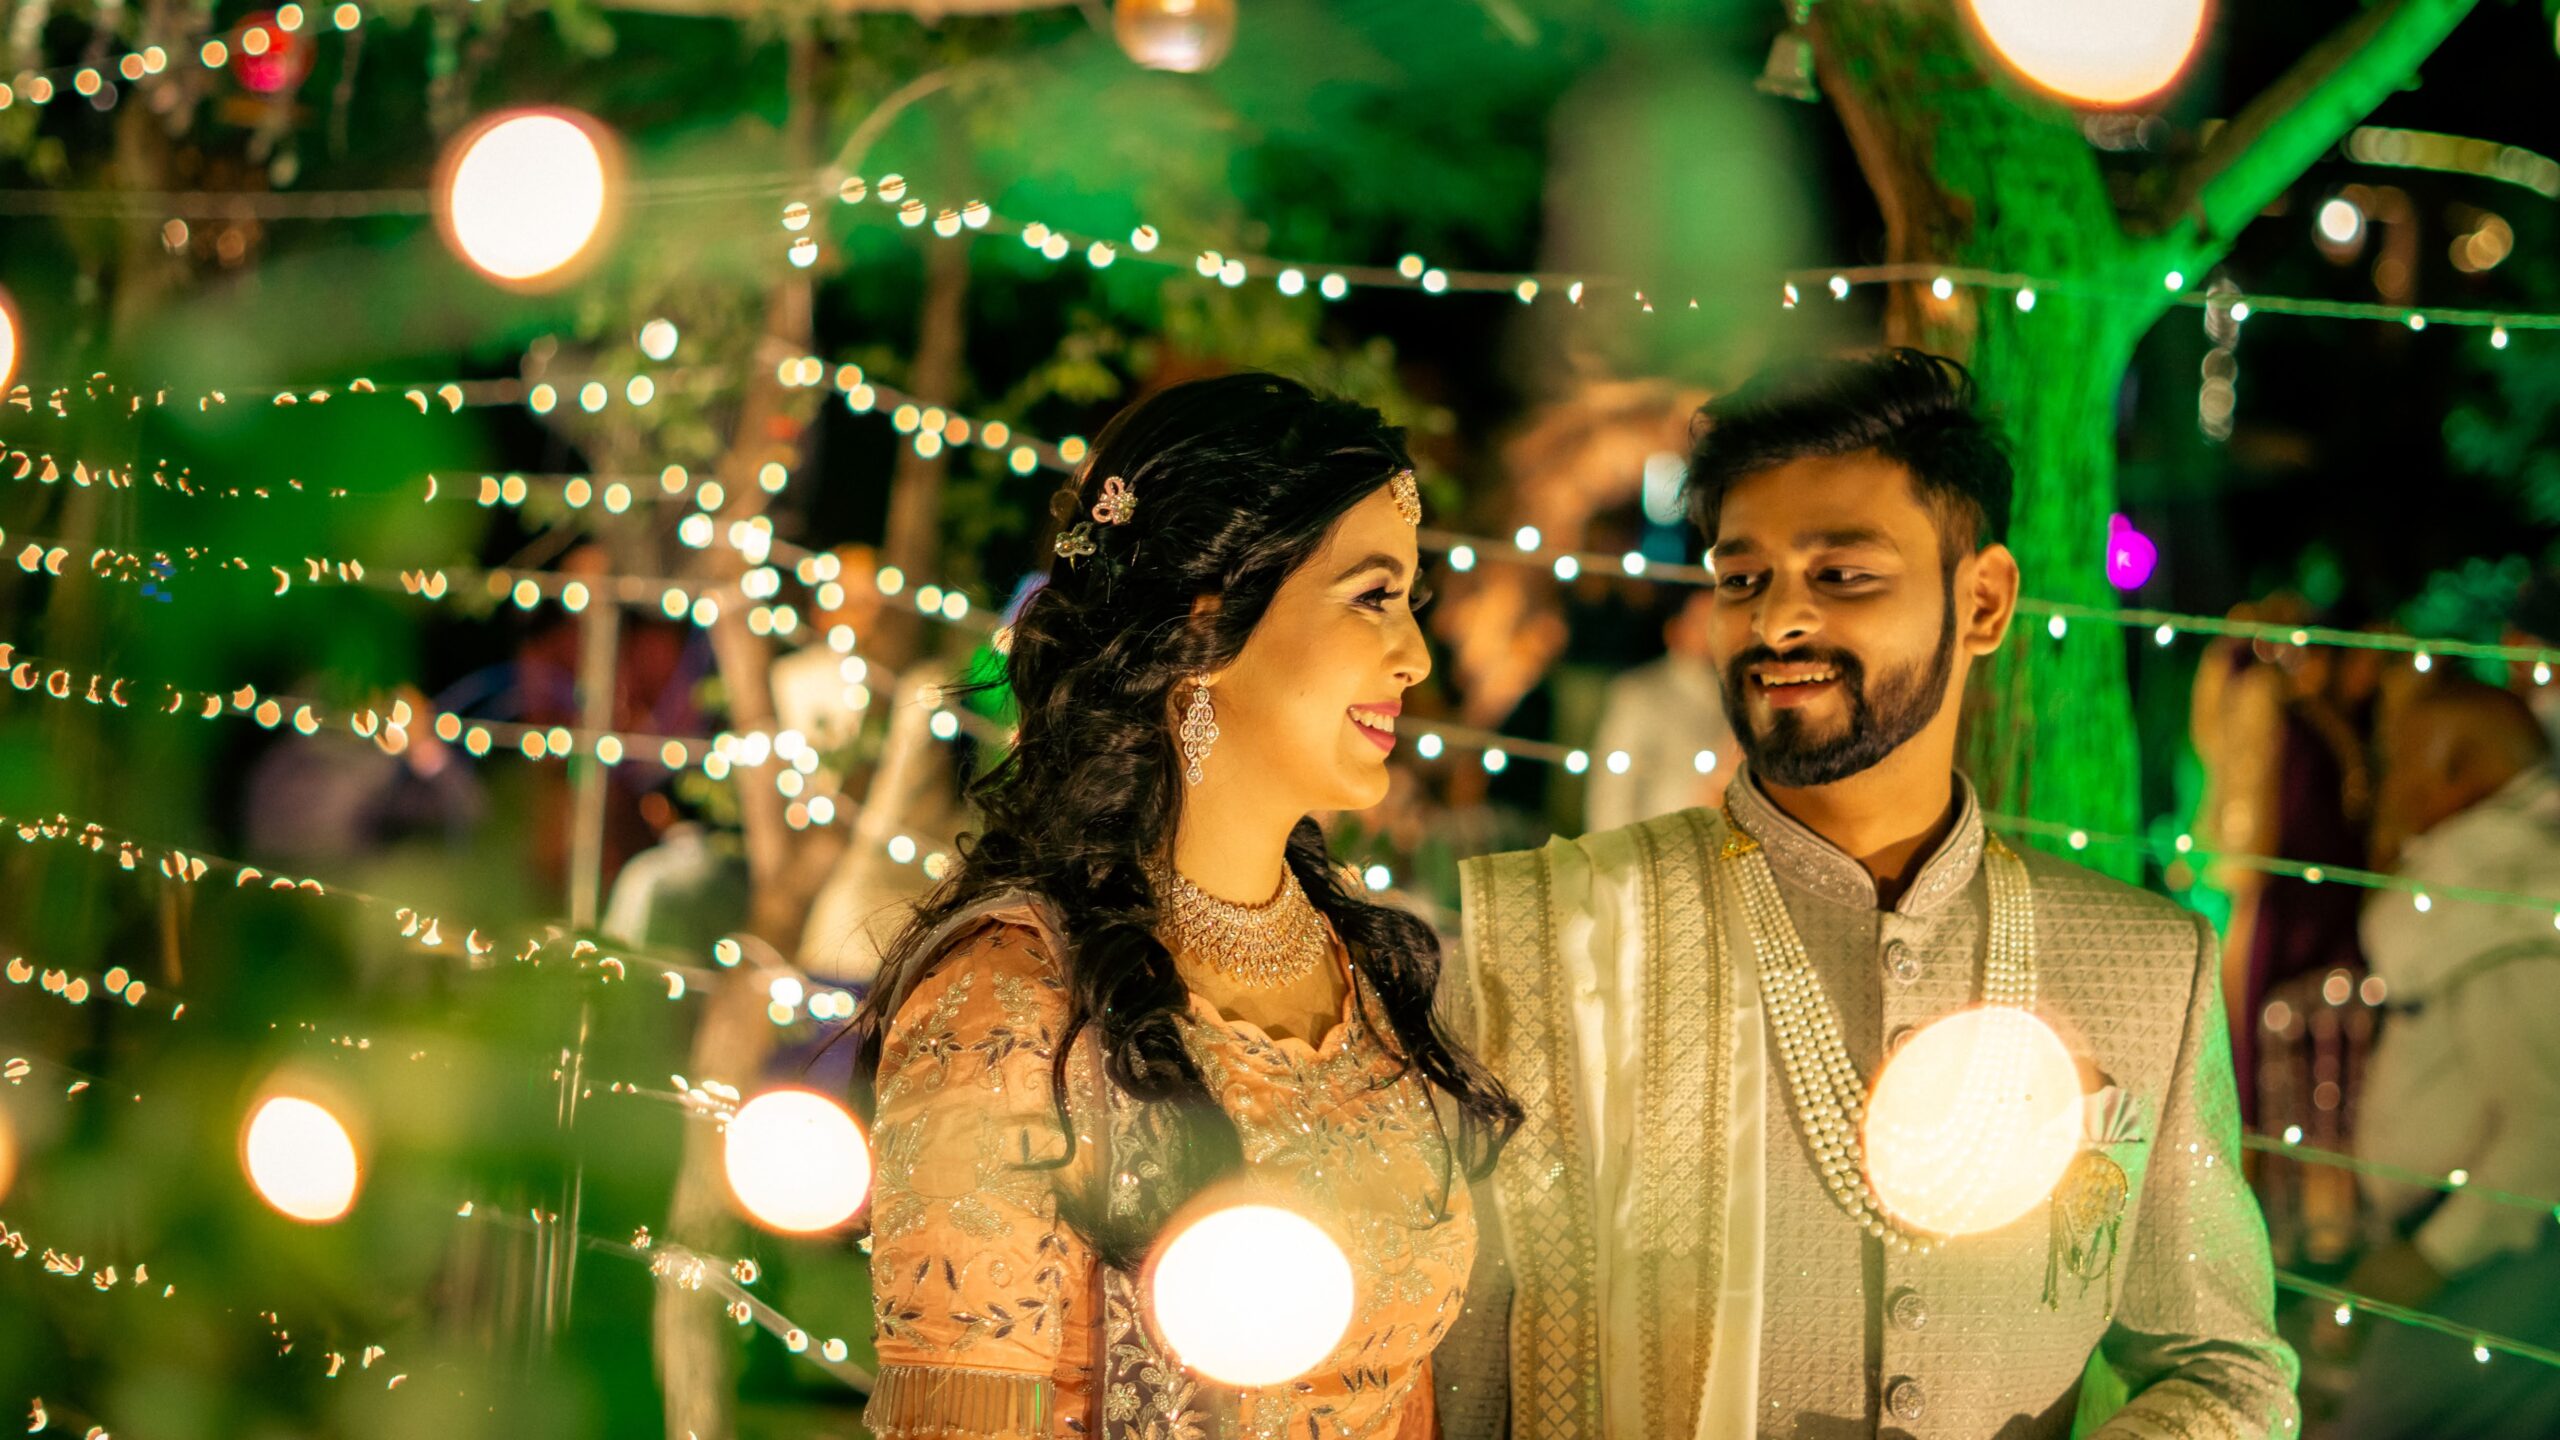 Creative Ways to Use LED Lights and Accessories at a Wedding